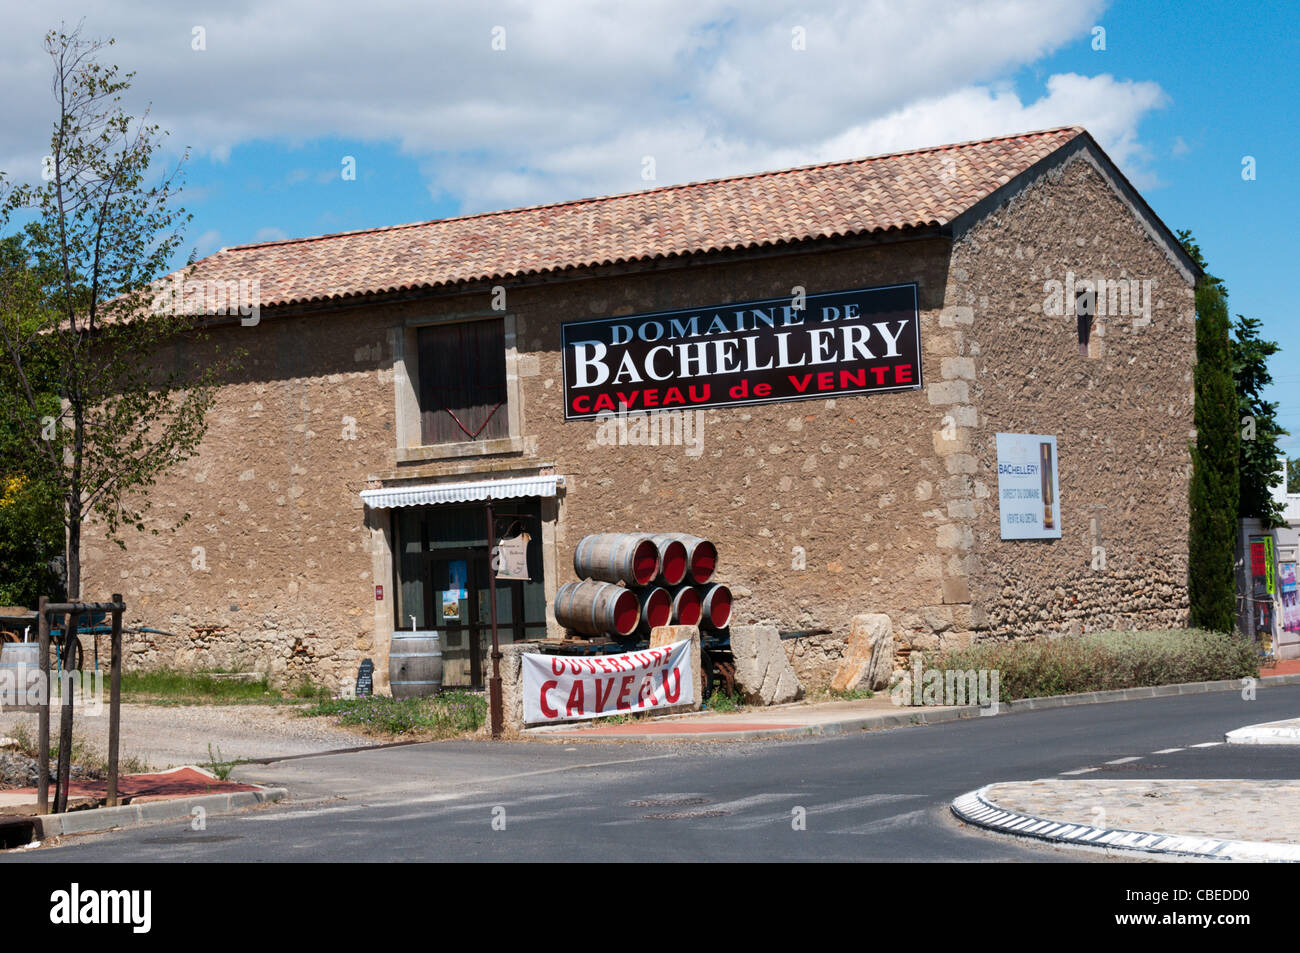 Domaine de Bachellery wine sellers on the outskirts of Beziers, Languedoc in southern France. Stock Photo